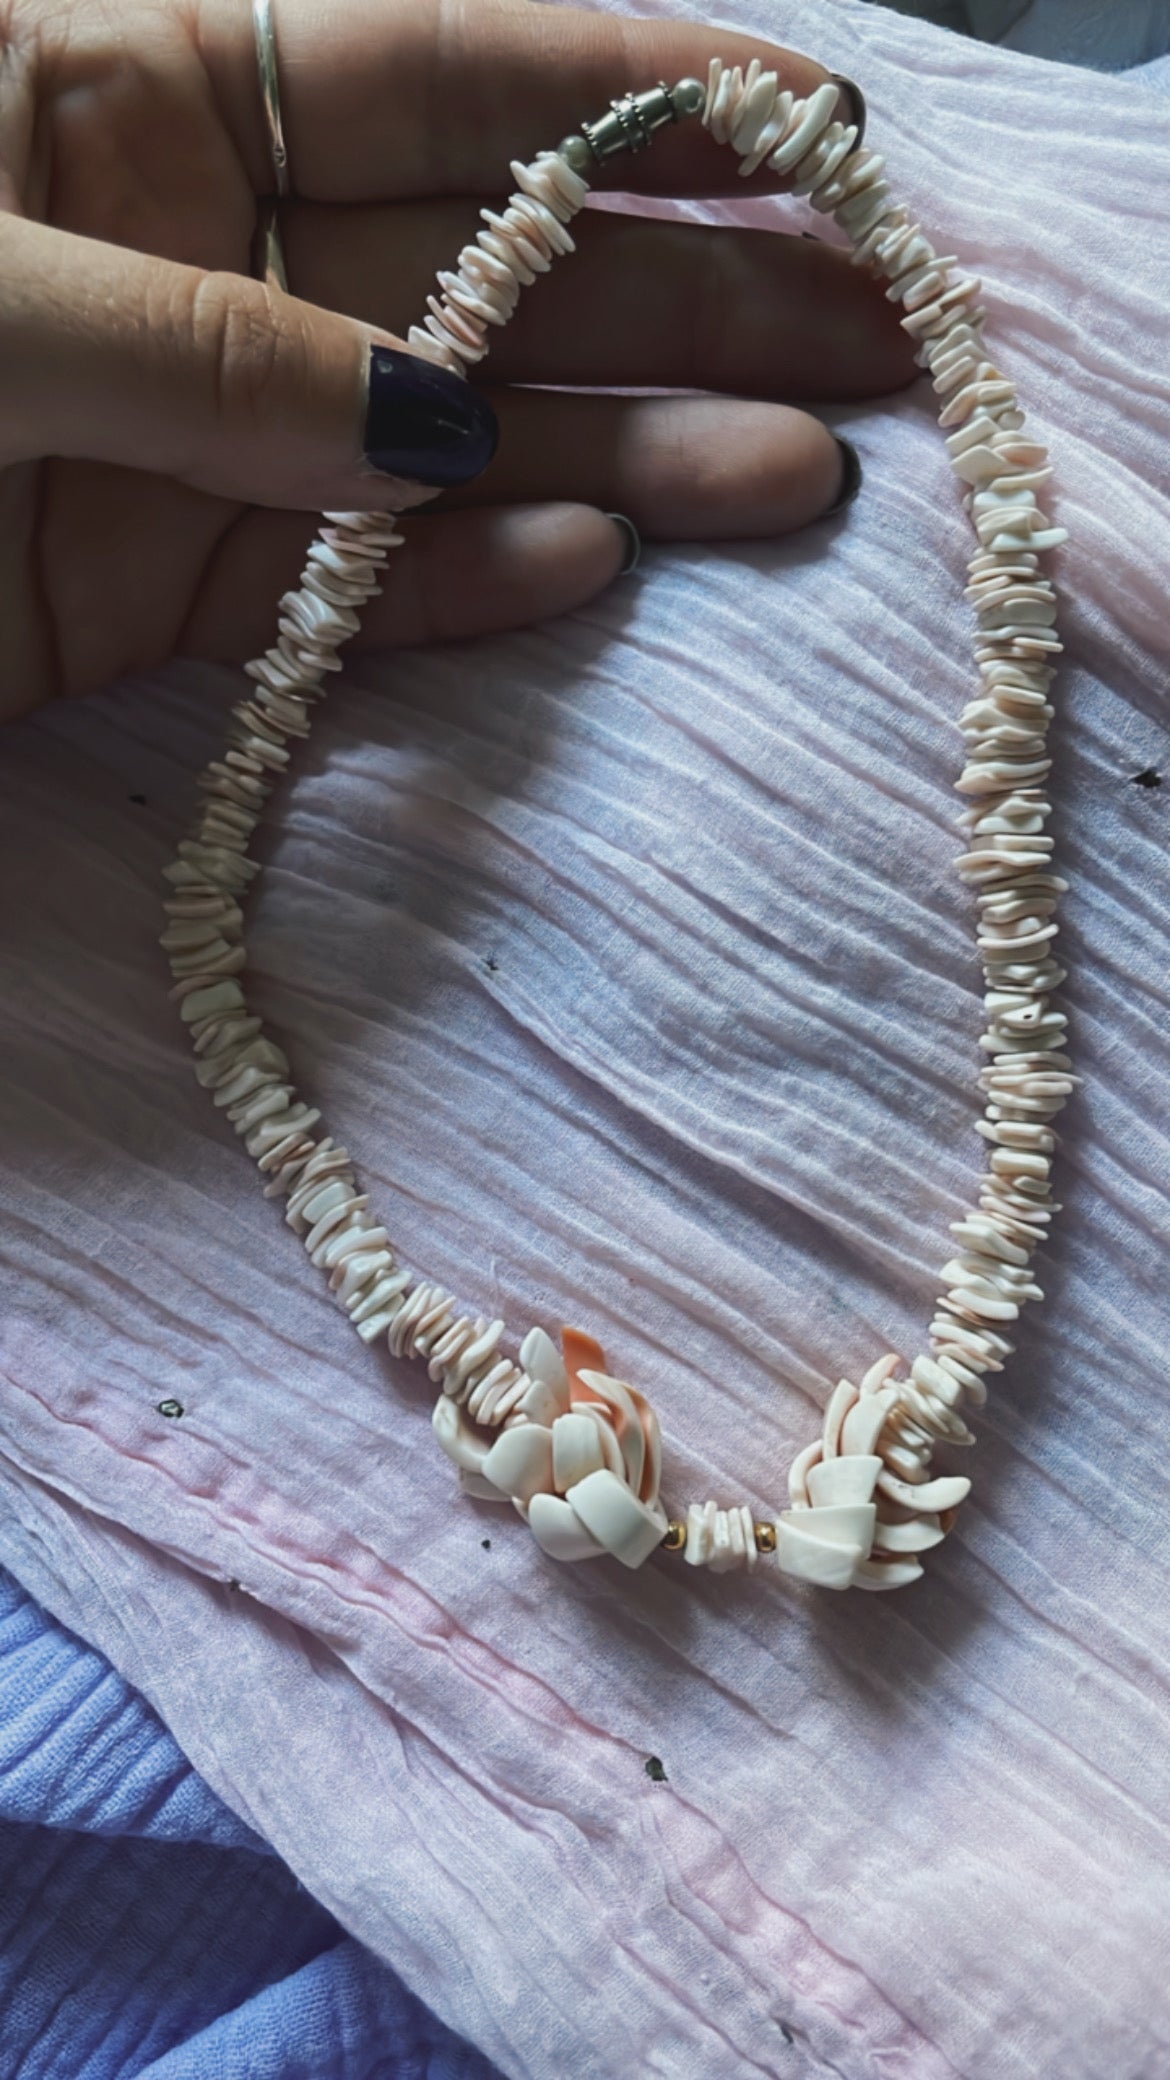 Shell necklaces